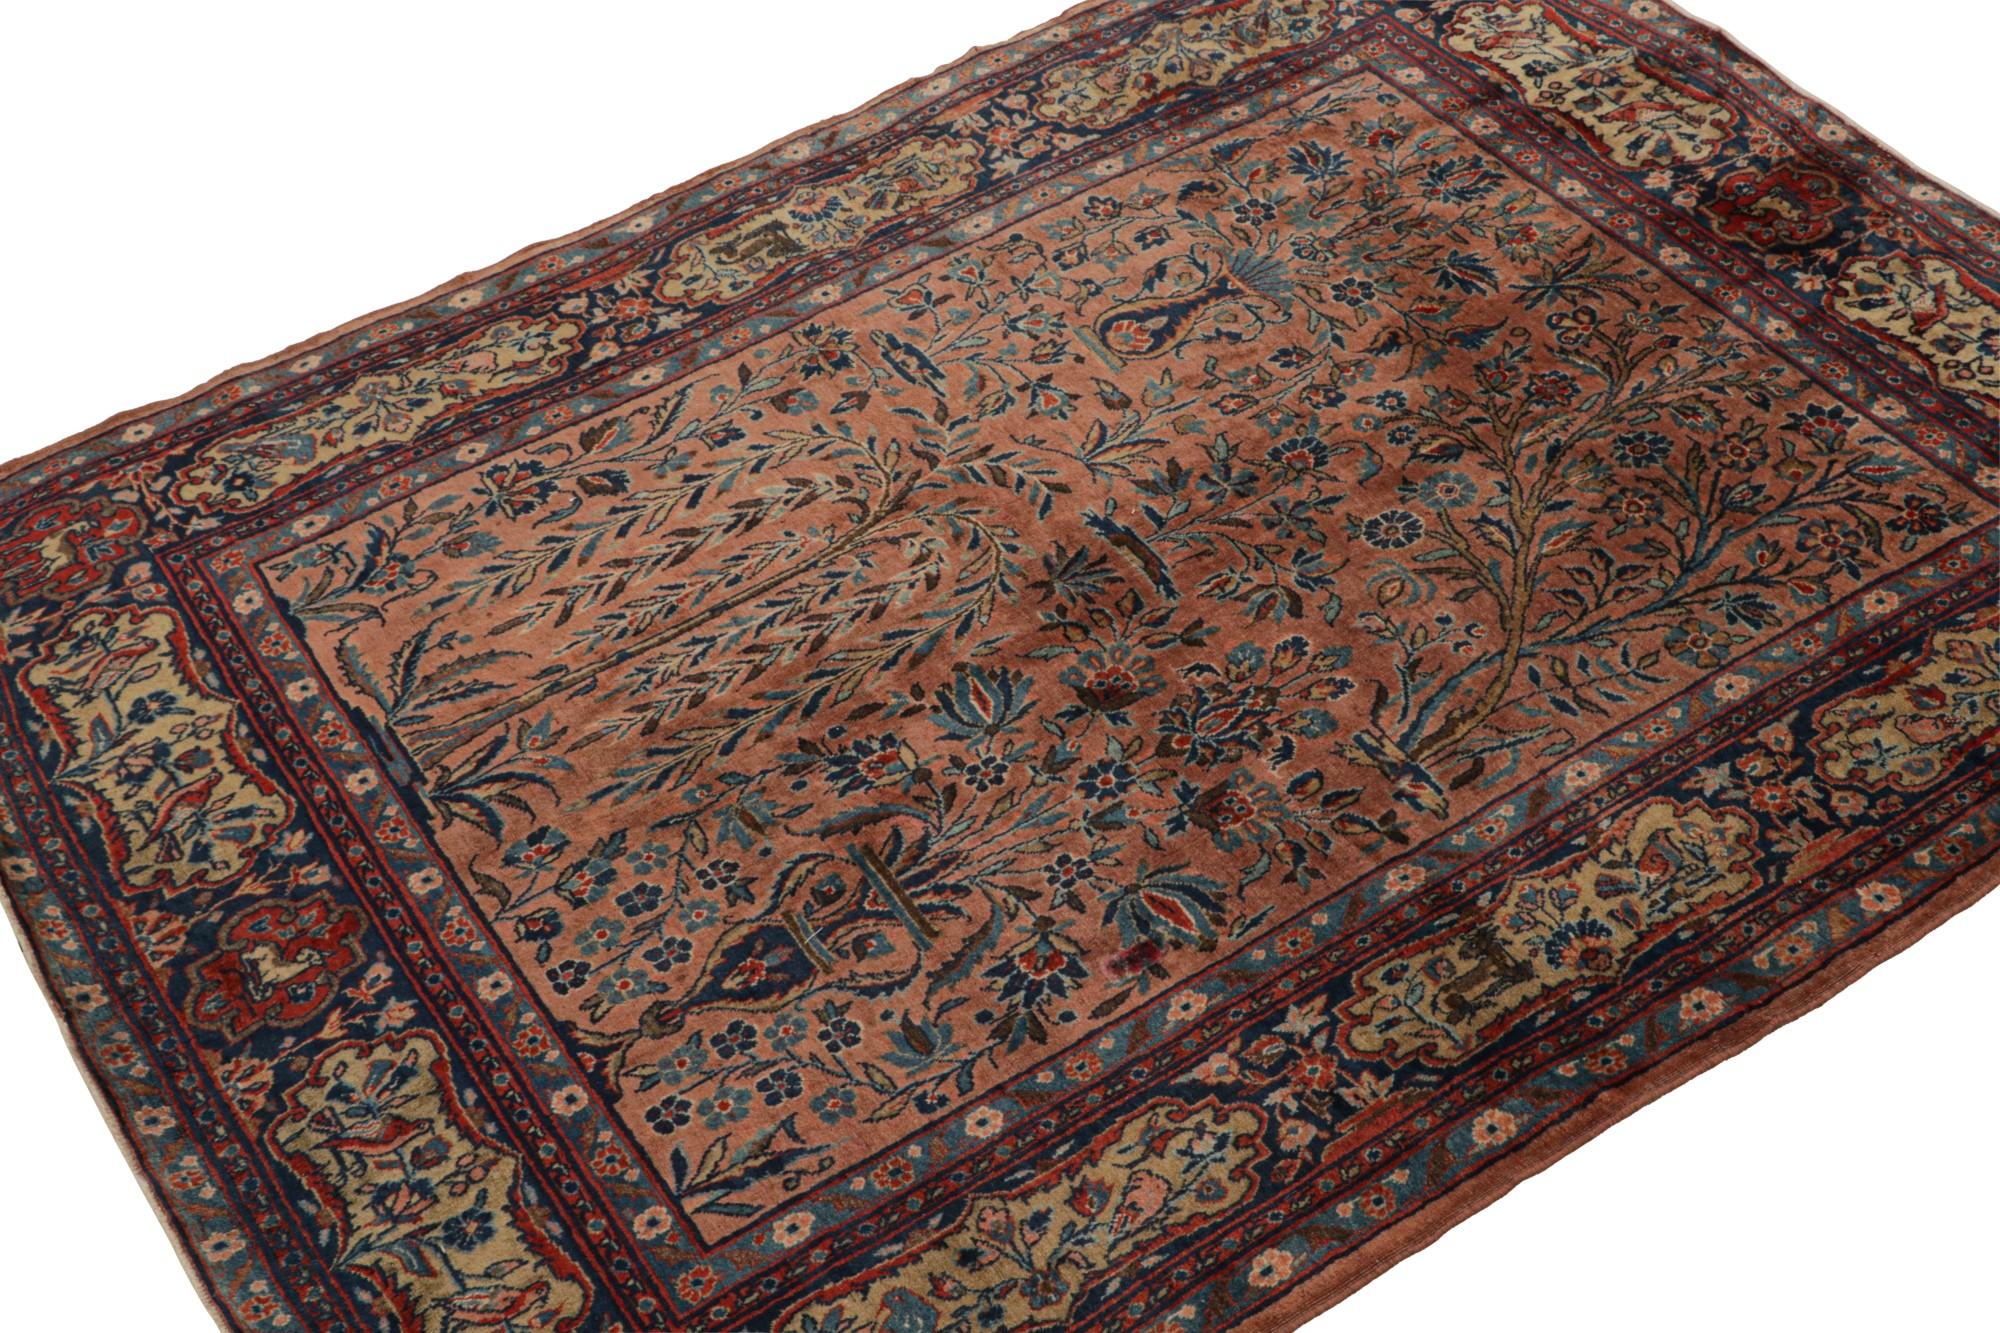 Hand-knotted in wool, this 4x5 antique Persian Kashan rug features a rare design with floral patterns, cartouches in the border and pictorials in an asymmetric field style. 

On the Design: 

Admirers of the craft will appreciate this masterpiece as